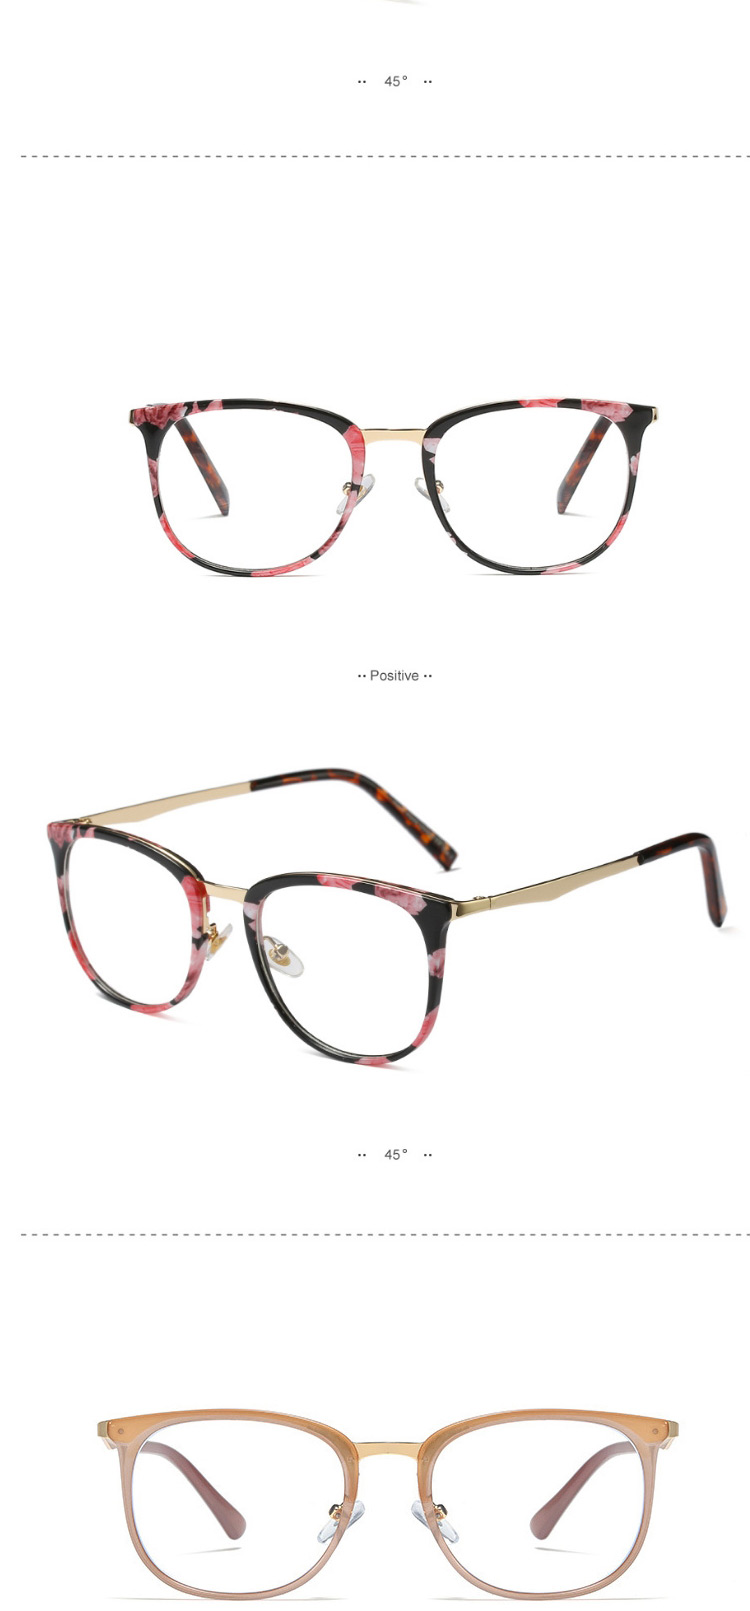 Fashion C2-2 Khaki/transparent Ultra-light Can Be Equipped With Myopia Round Frame,Fashion Glasses